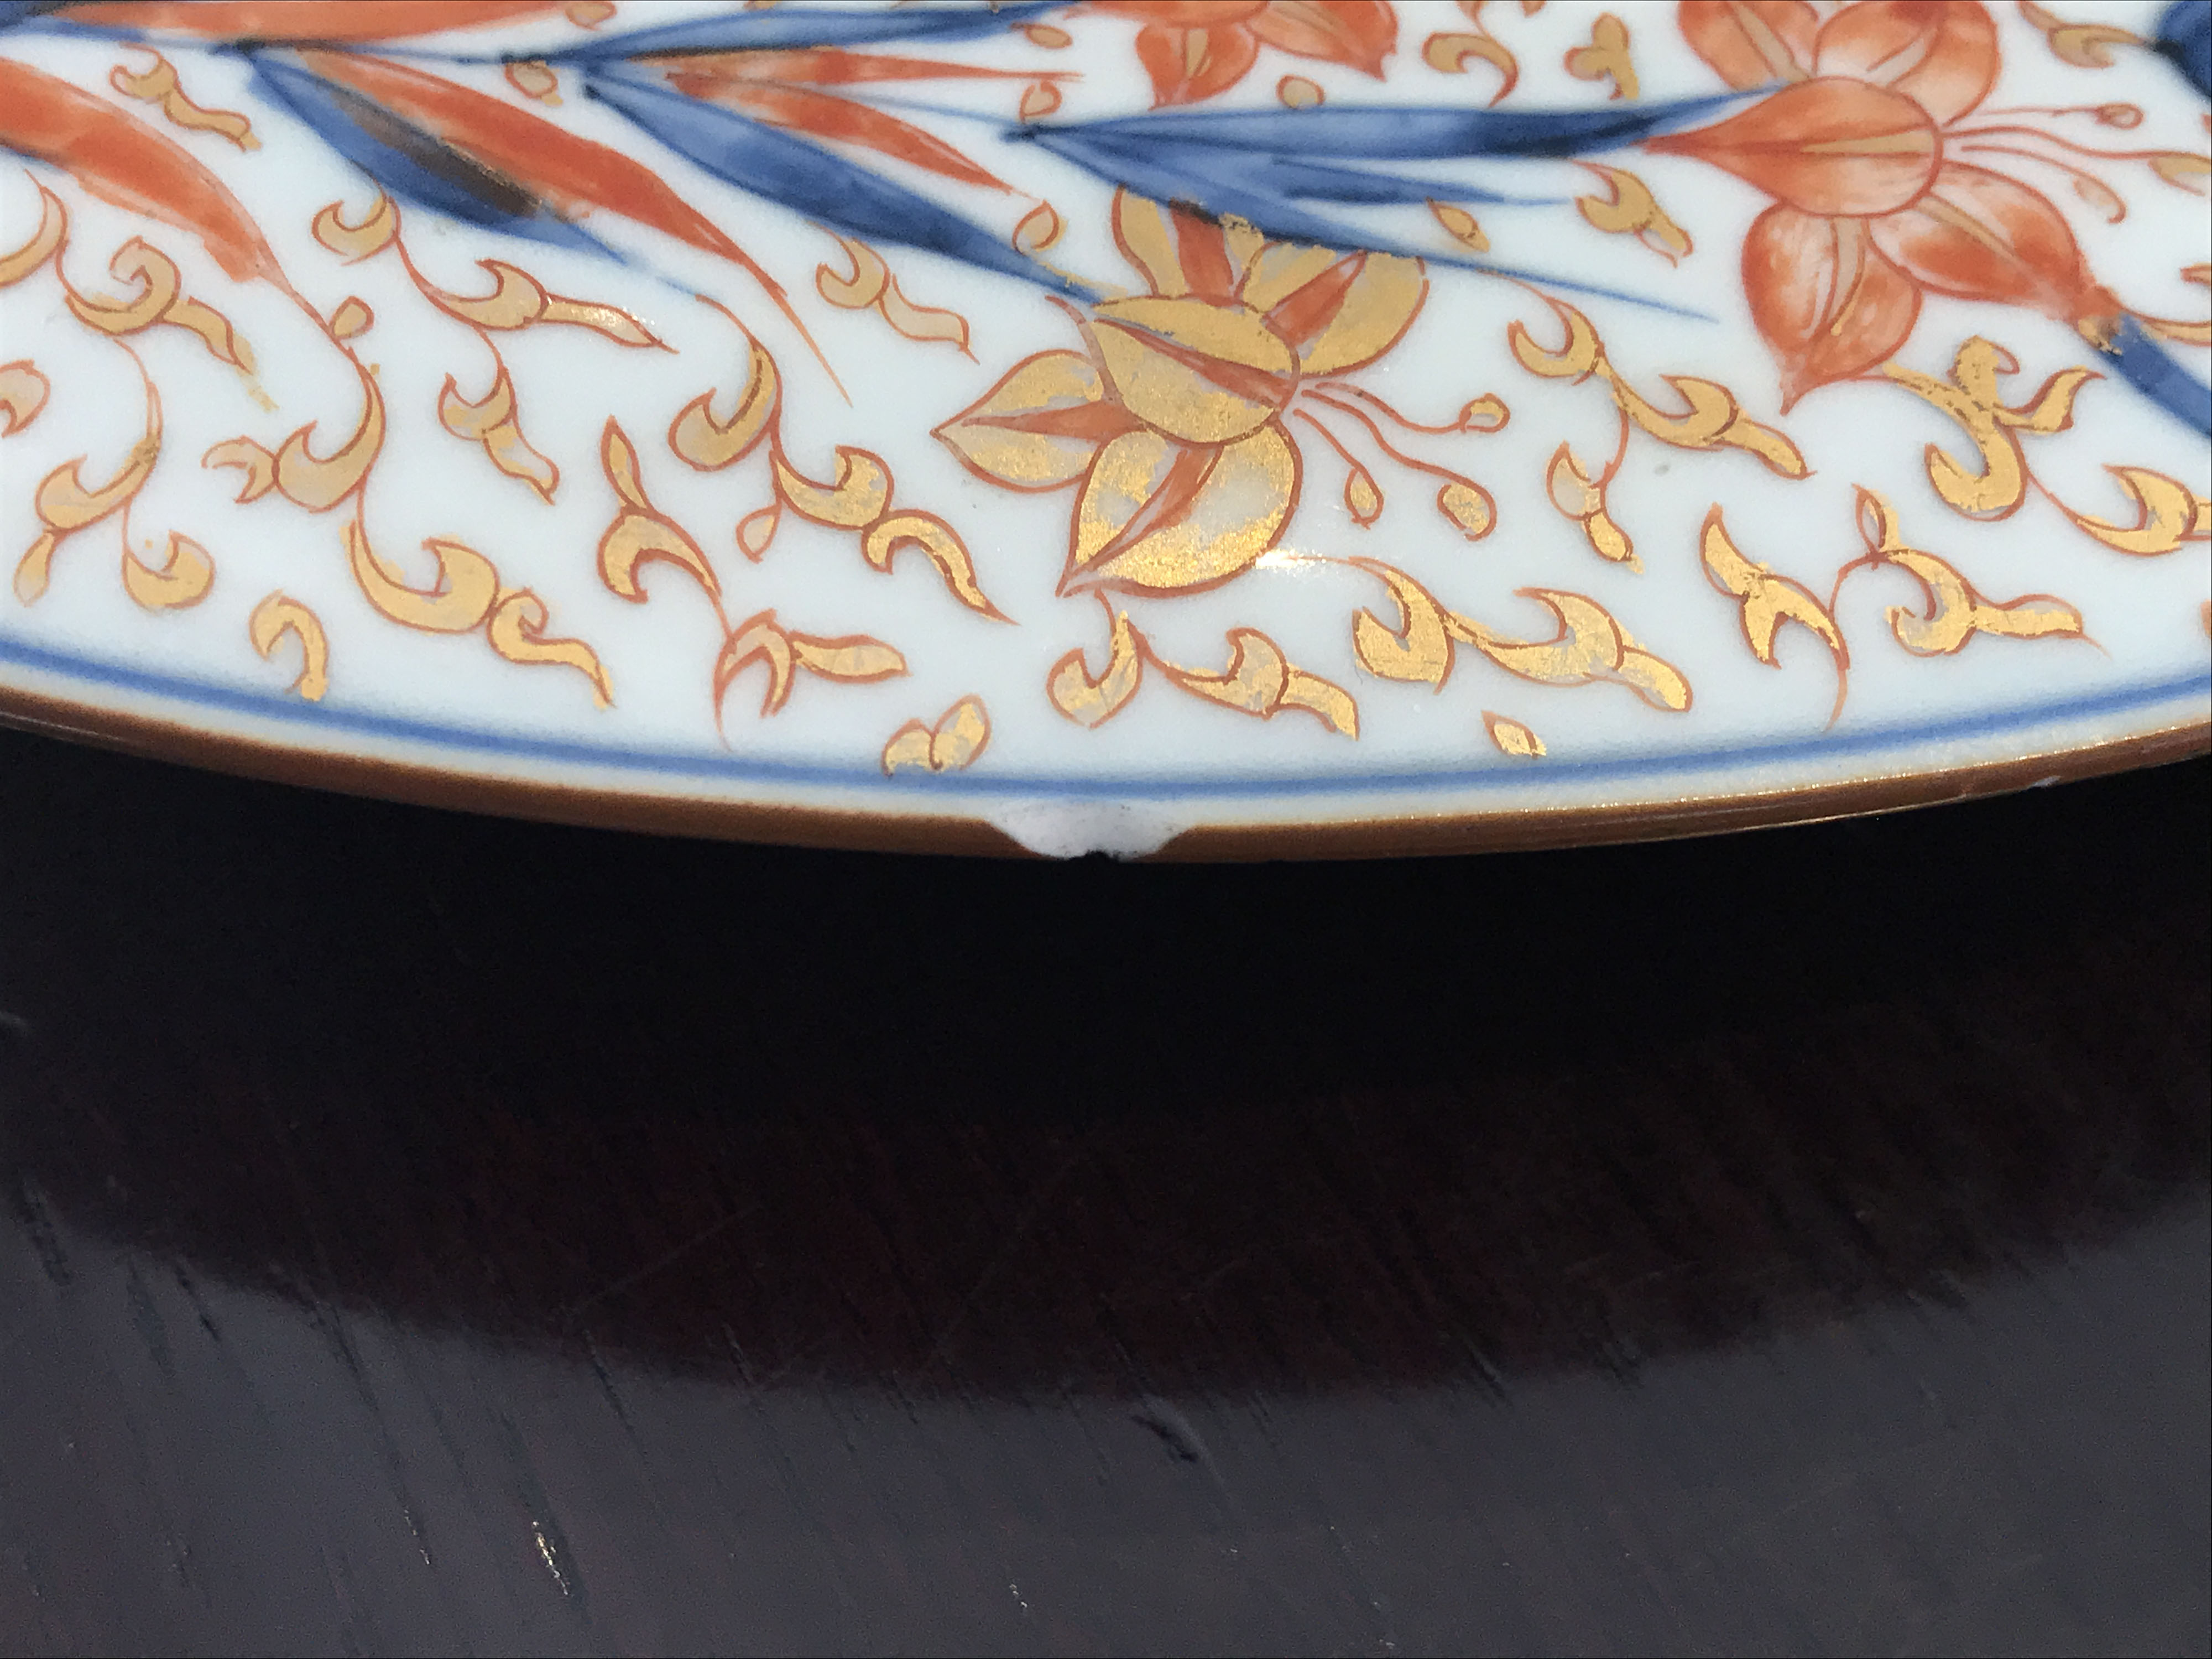 A Chinese Export 'Imari' dish, Qing Dynasty, 18th century